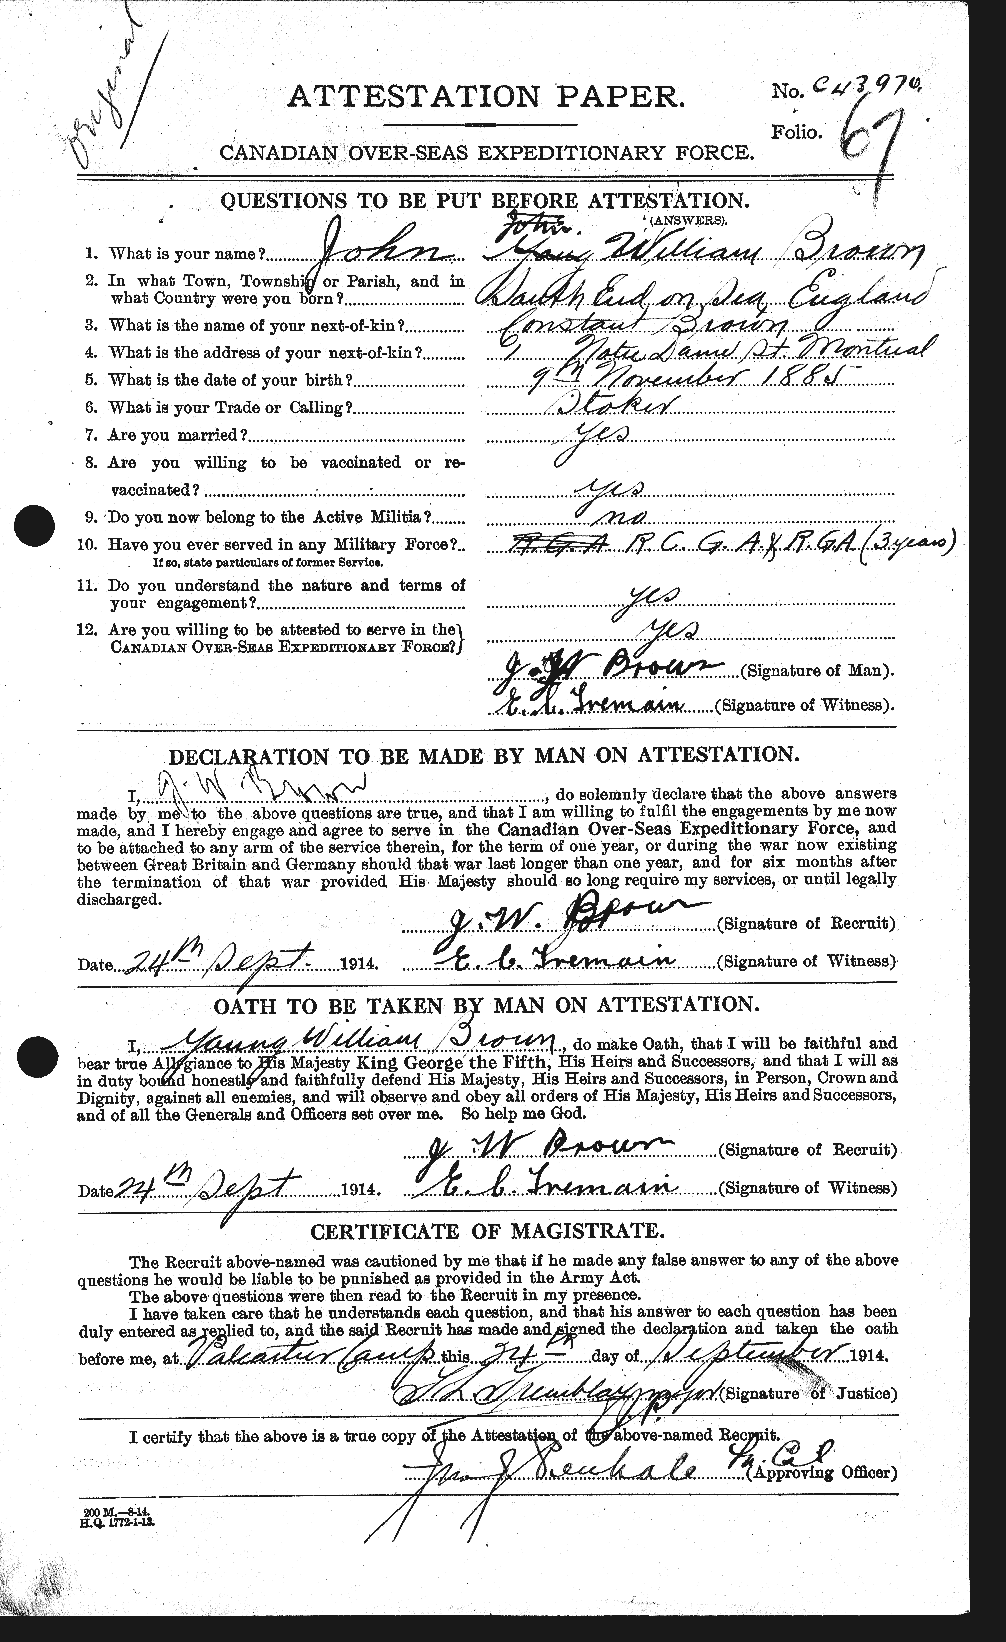 Personnel Records of the First World War - CEF 265911a